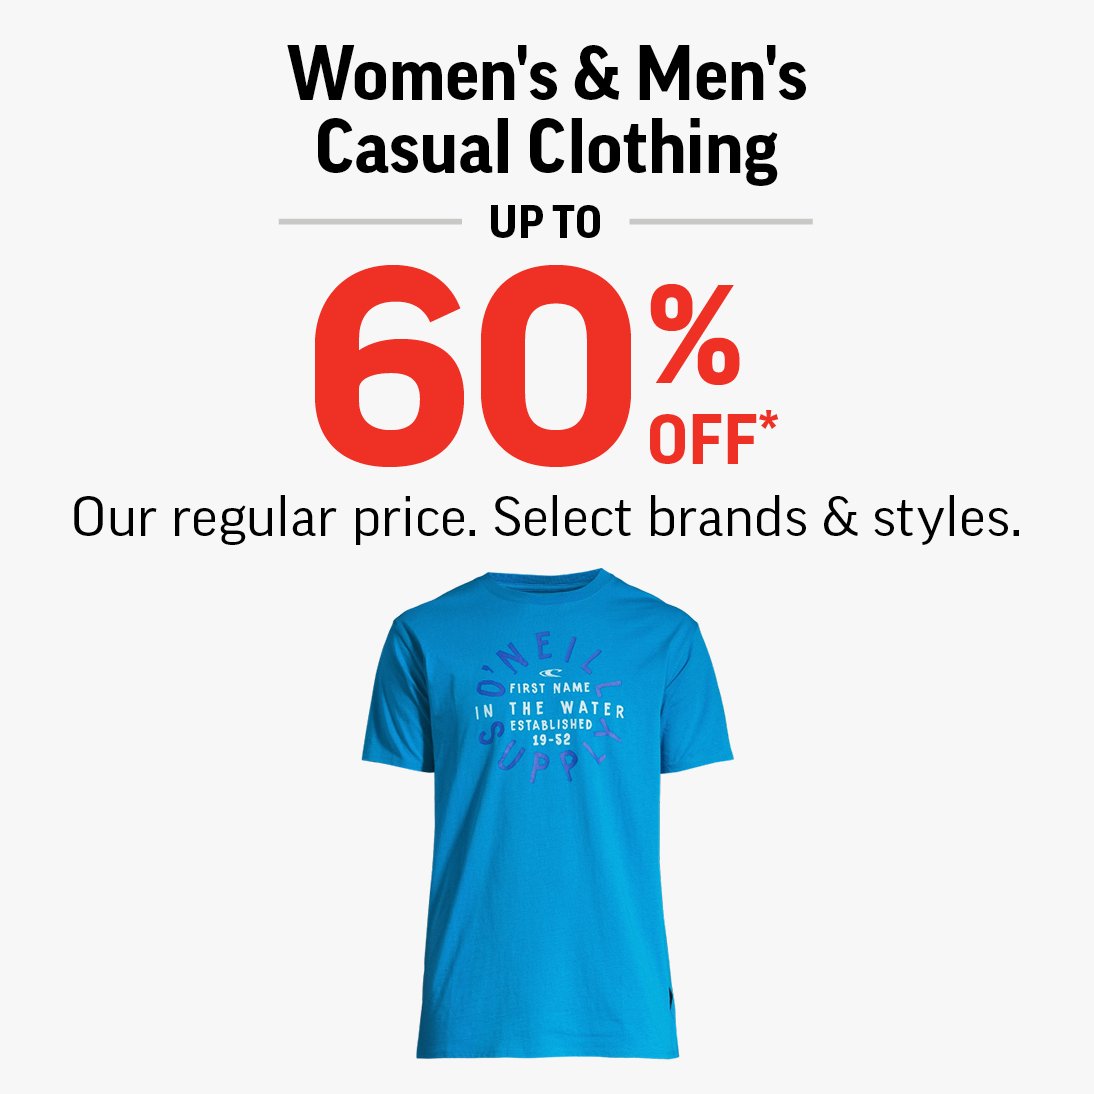 WOMEN'S & MEN'S CASUAL CLOTHING UP TO 60% OFF